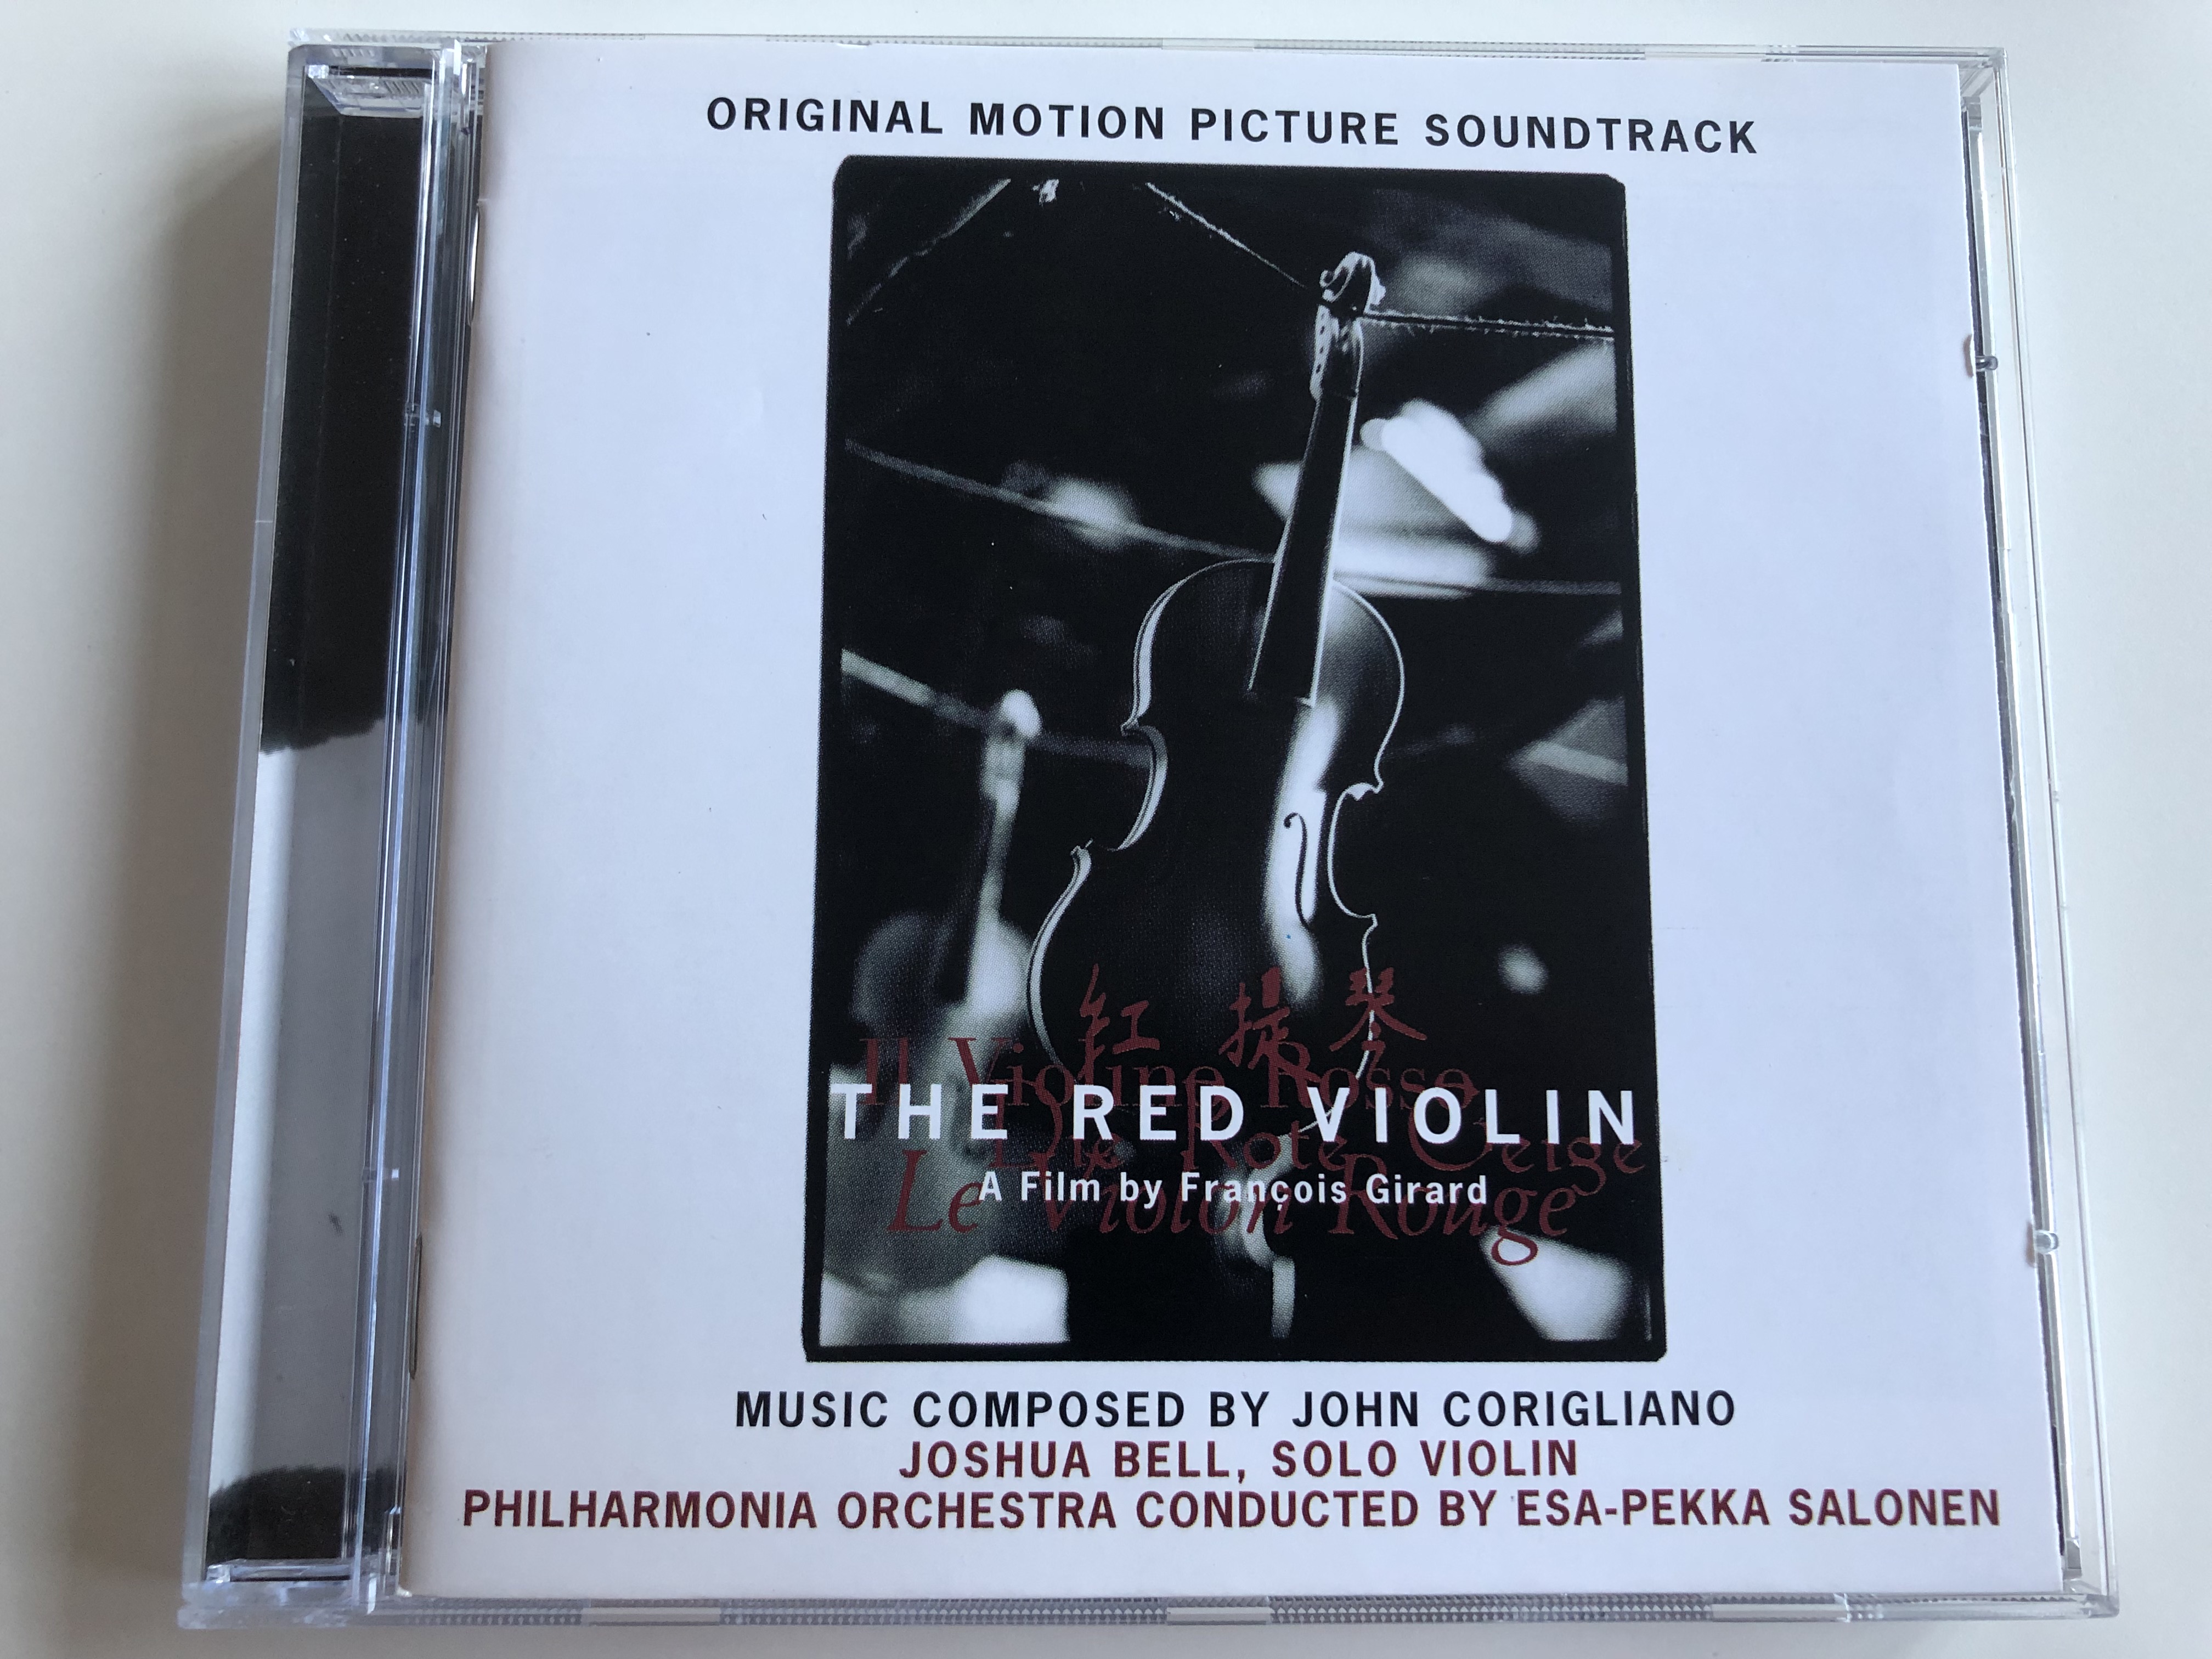 original-motion-picture-soundtrack-the-red-violin-a-film-by-francois-girard-music-composed-by-john-corigliano-joshua-bell-solo-violin-philharmonia-orchestra-conducted-by-esa-pekka-salonen-1-.jpg